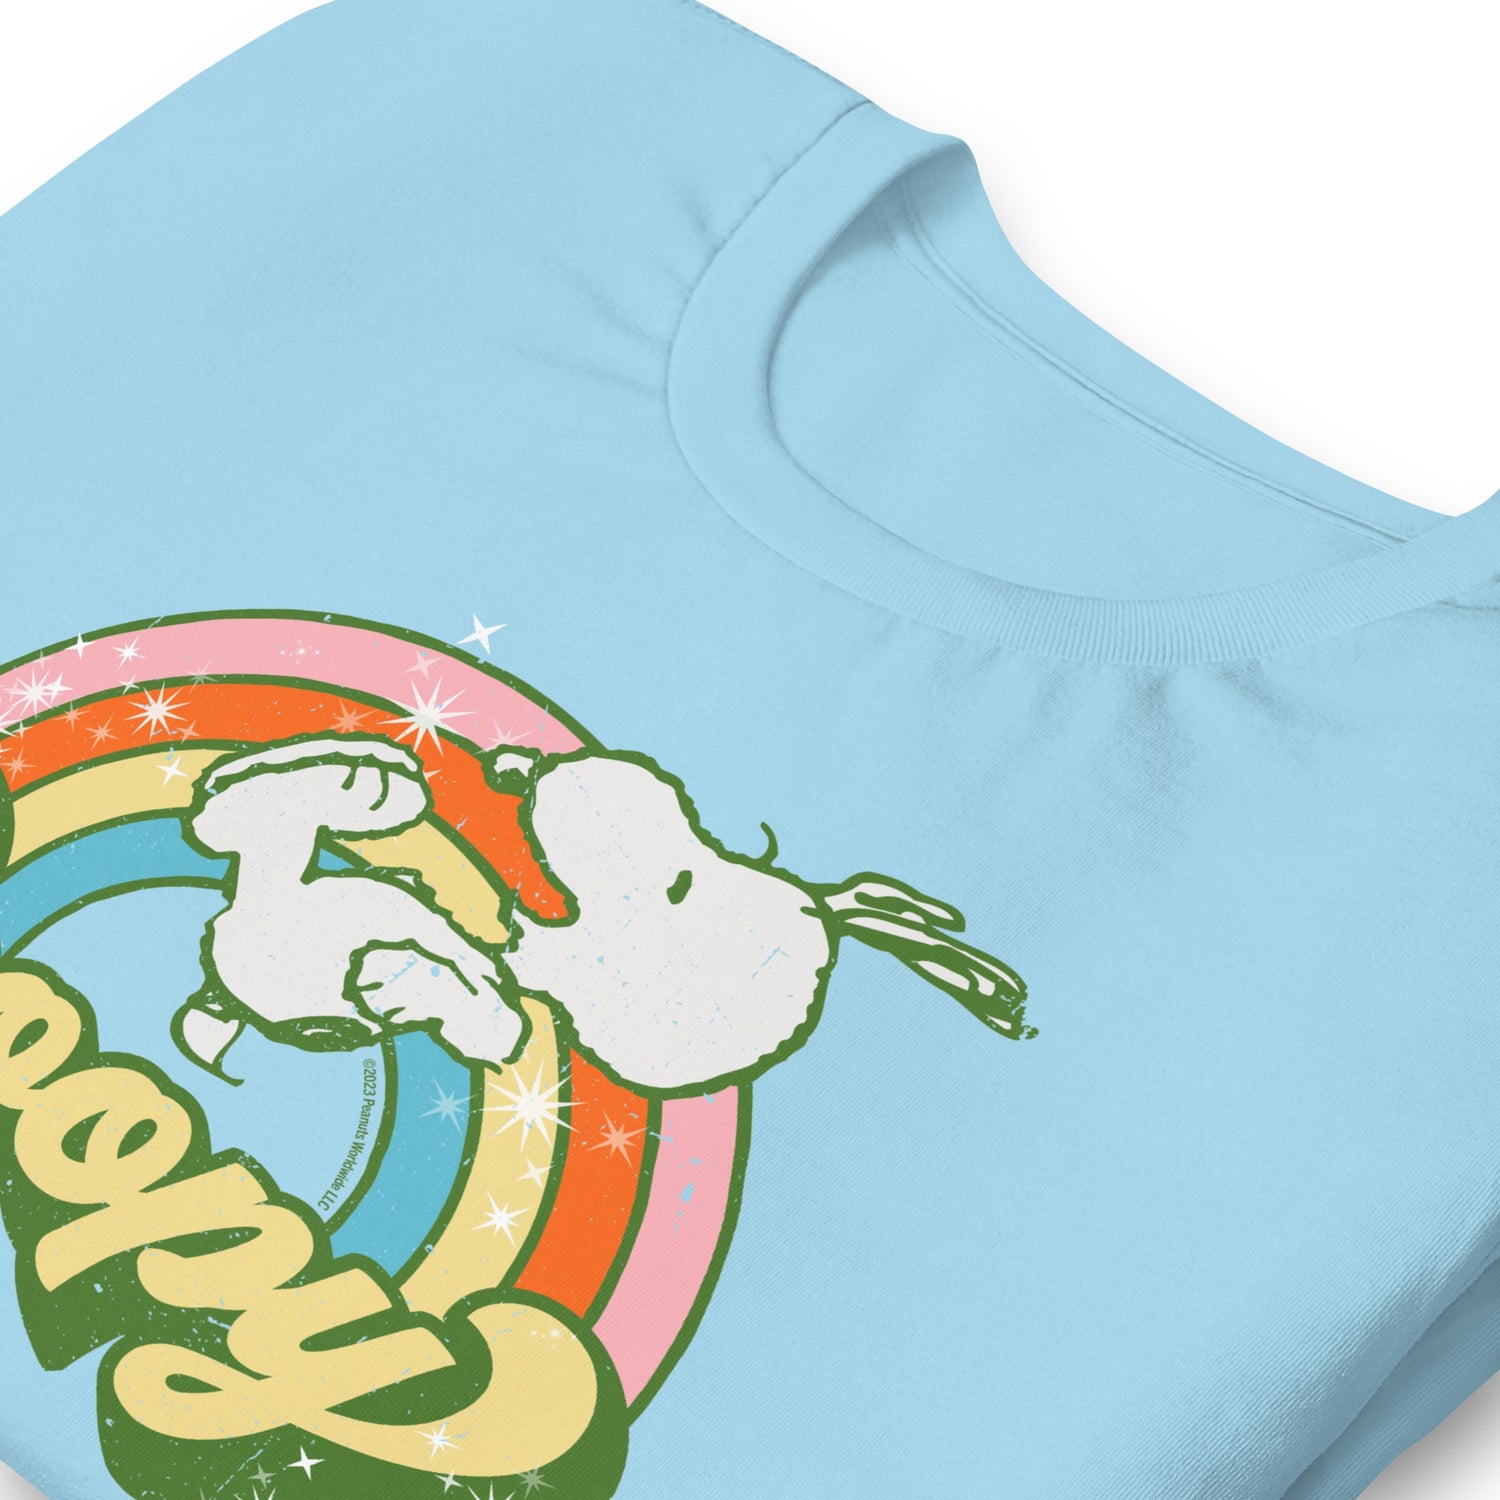 Snoopy Rainbow Adult T-Shirt – The Peanuts Store